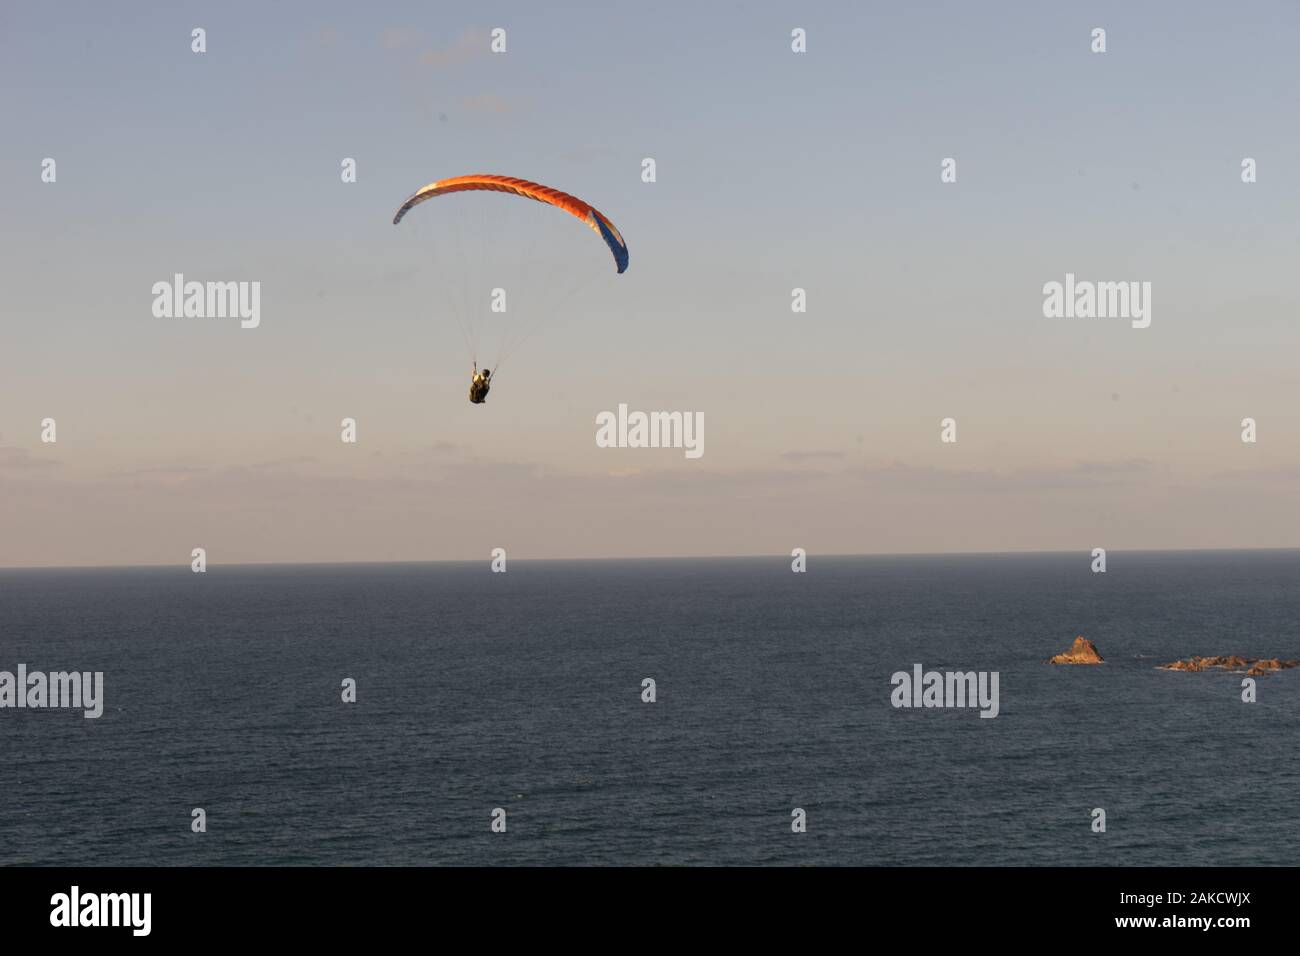 A man is paragliding at the beach of Legzira in the upwinds from the cliff Stock Photo